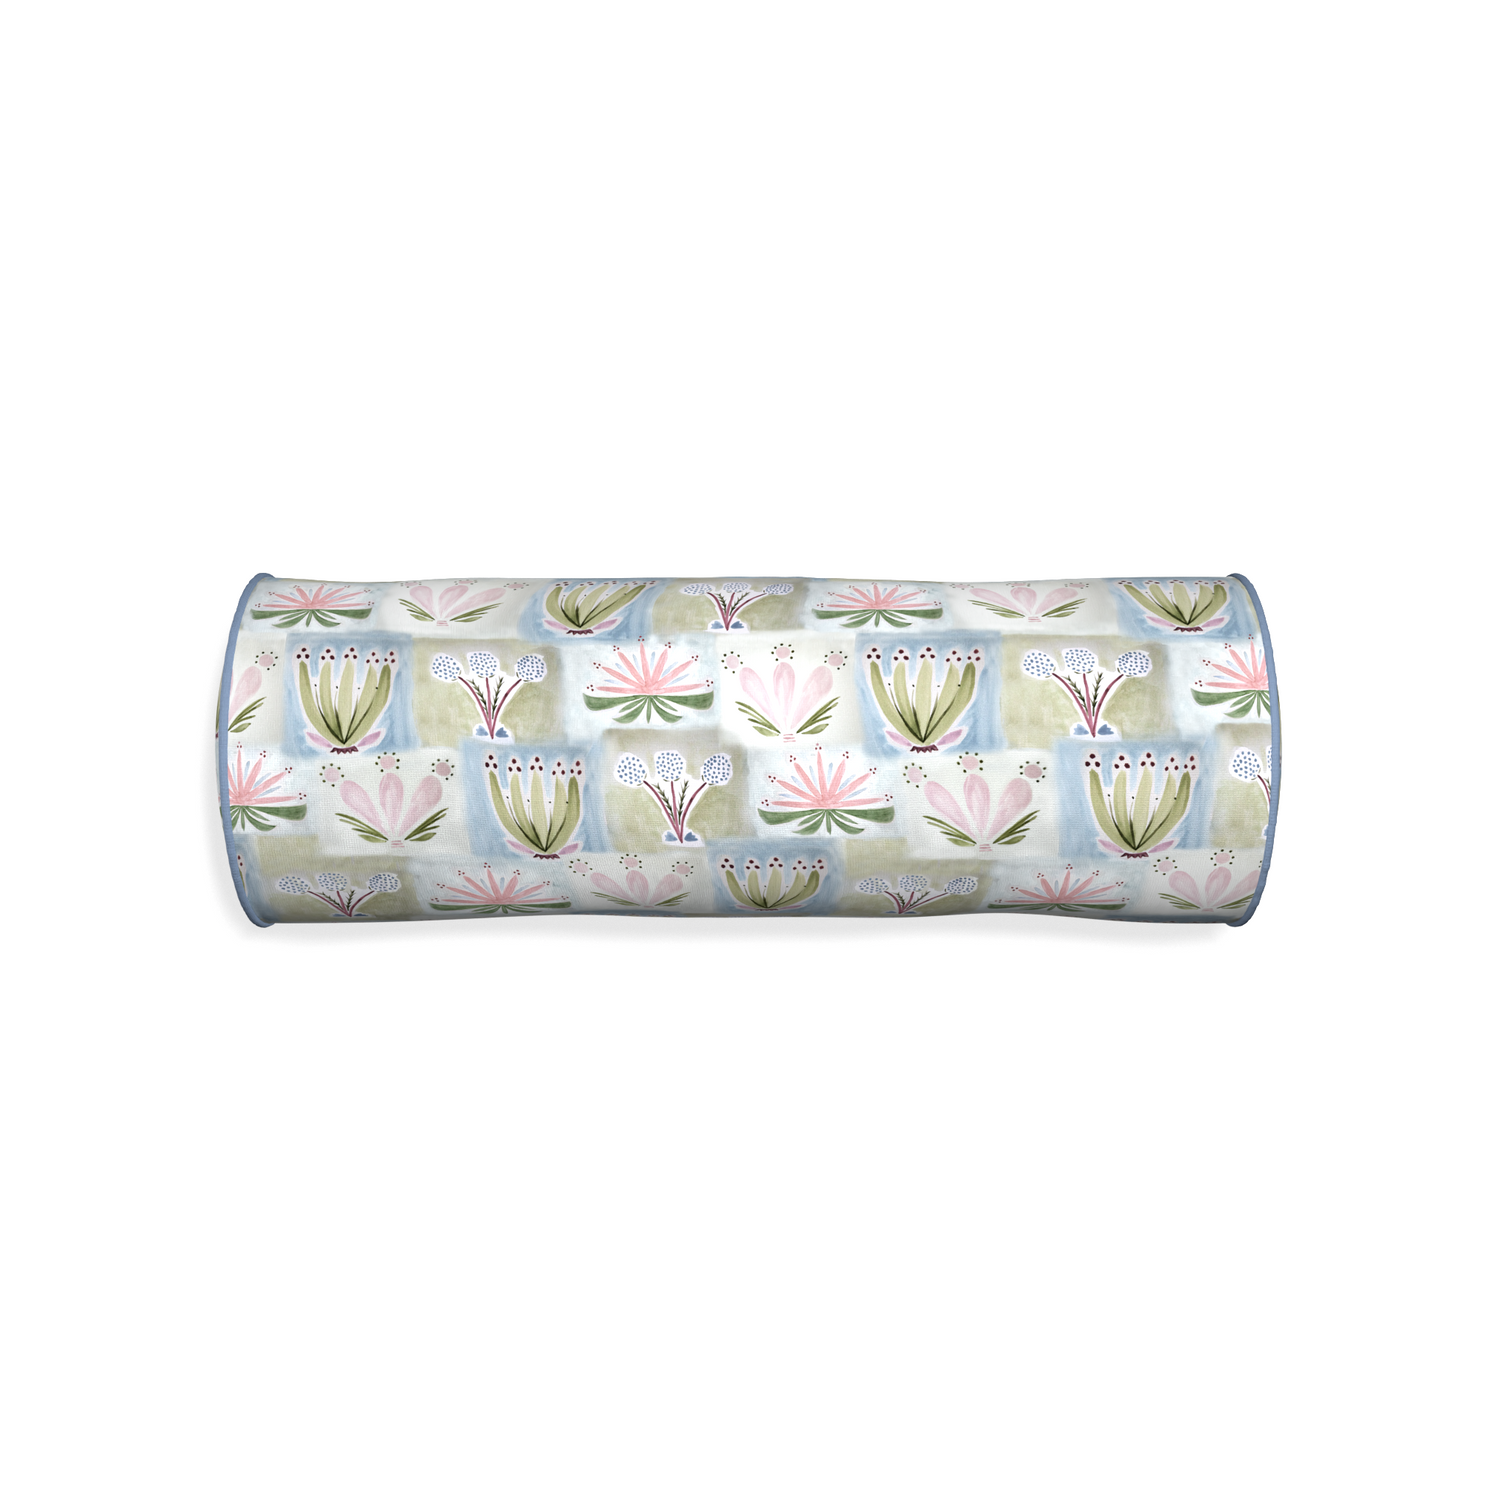 Bolster harper custom hand-painted floralpillow with sky piping on white background